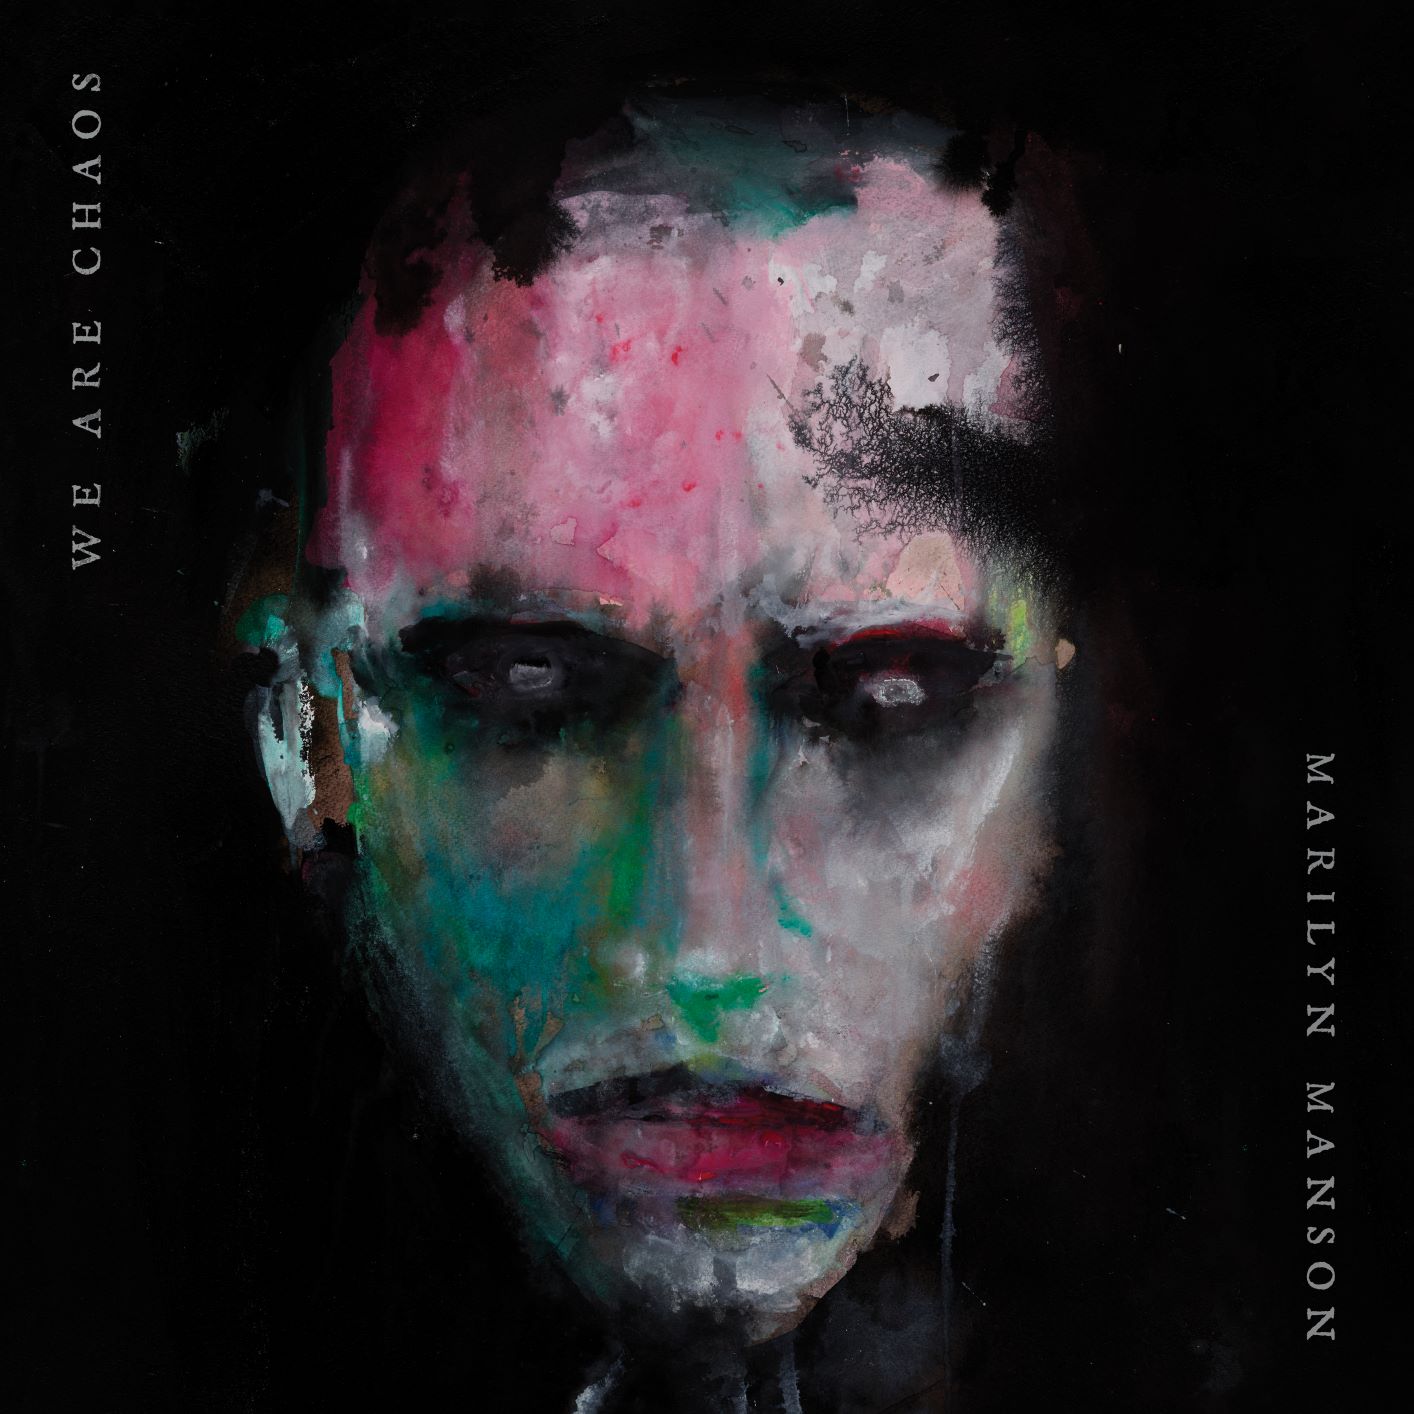 Marilyn Manson - WE ARE CHAOS [LP] (INDIE Exclusive w/ Postcards) - Vinyl